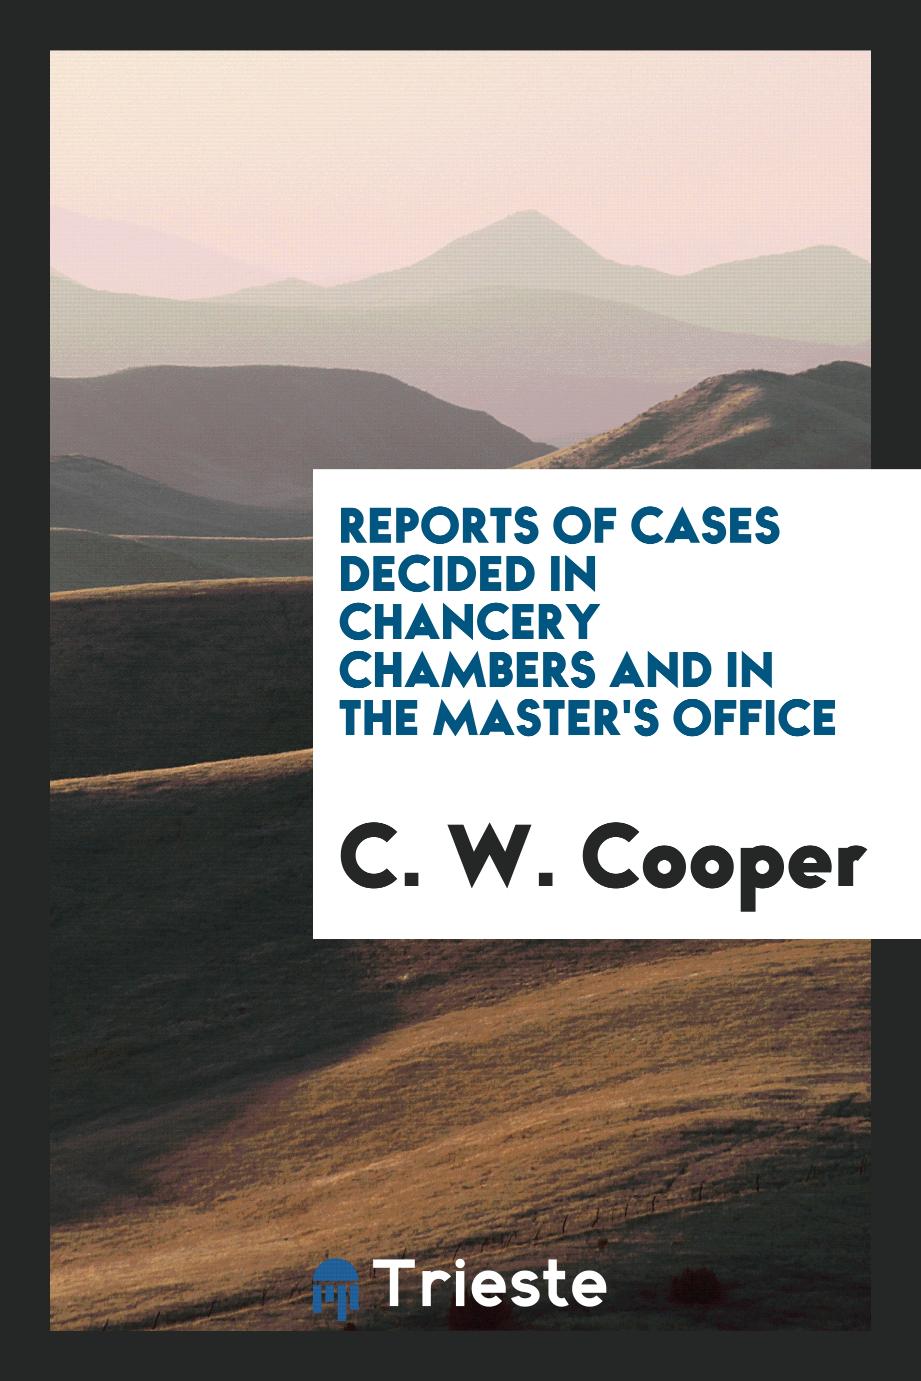 Reports of Cases Decided in Chancery Chambers and in the Master's Office